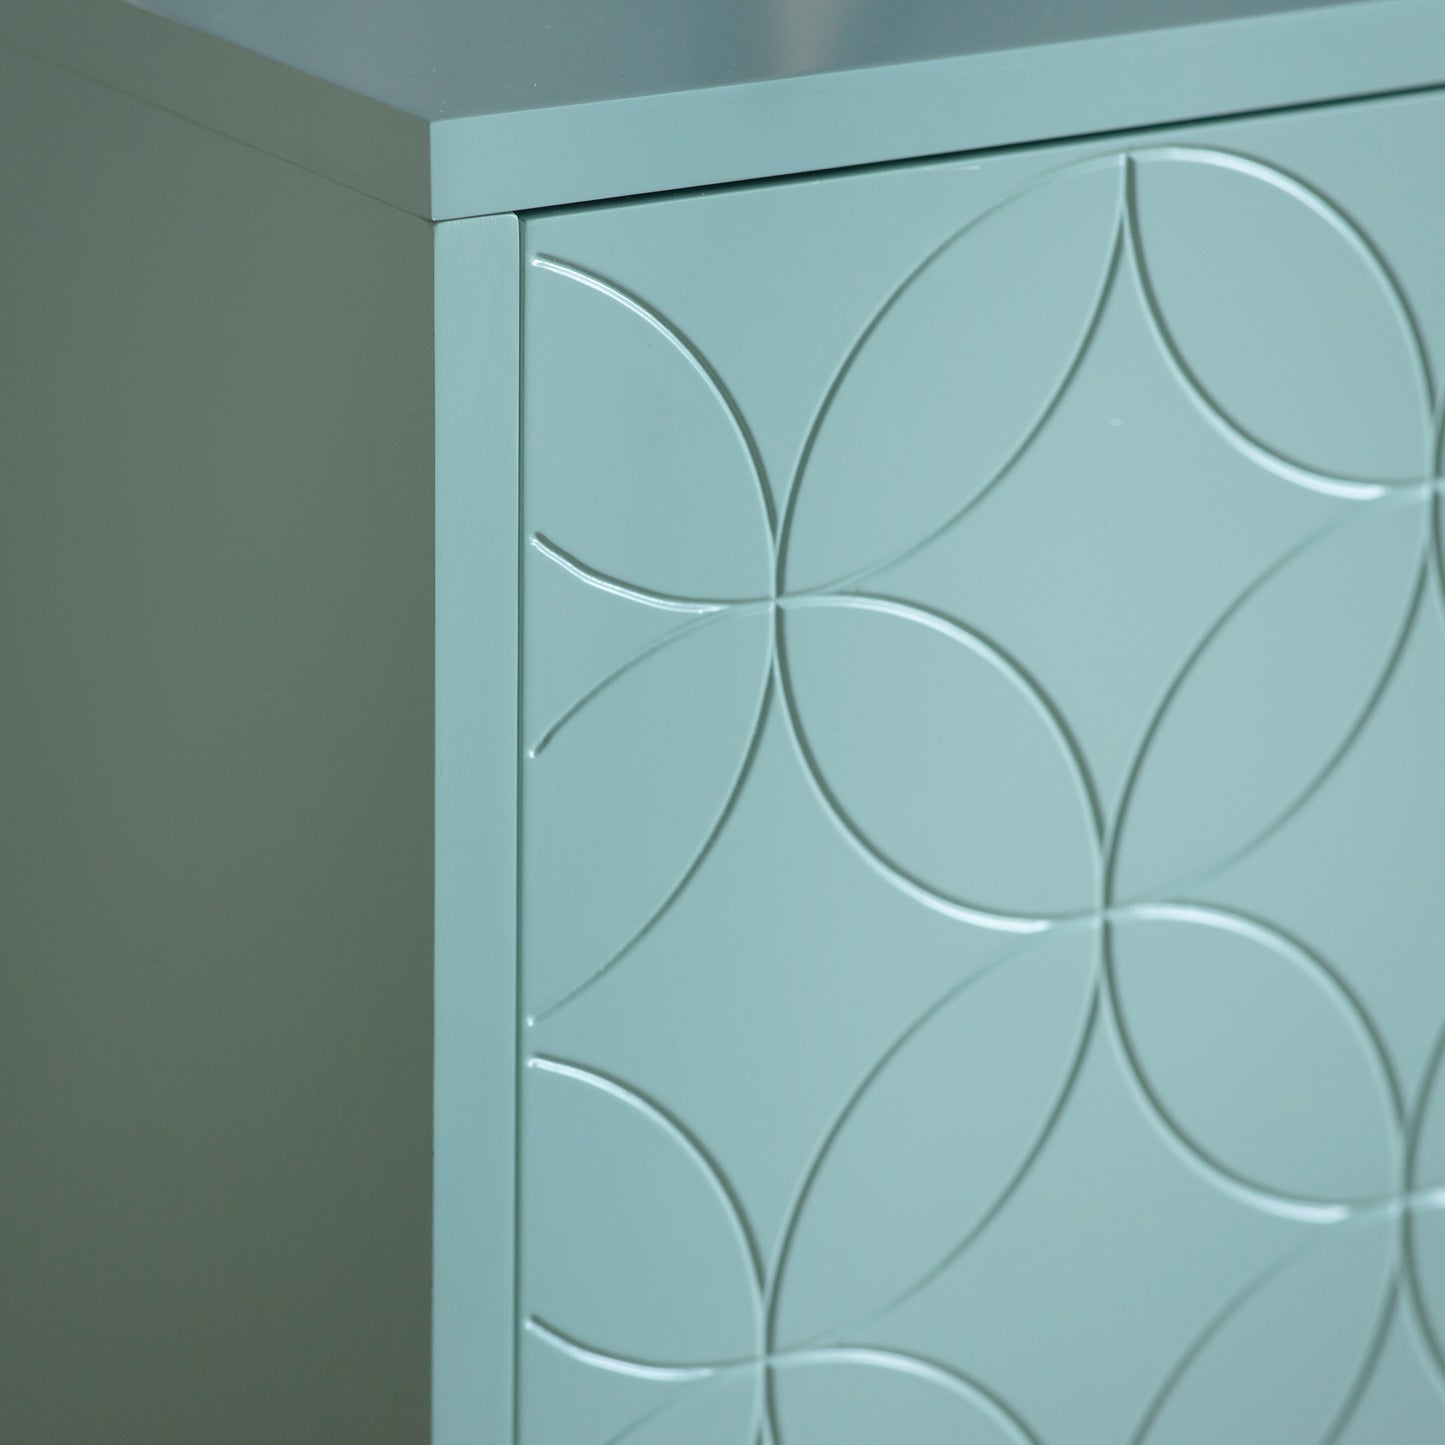 A close up of a Kikiathome.co.uk Thurlestone 2 Door Cabinet with a geometric design, perfect for interior decor and home furniture.